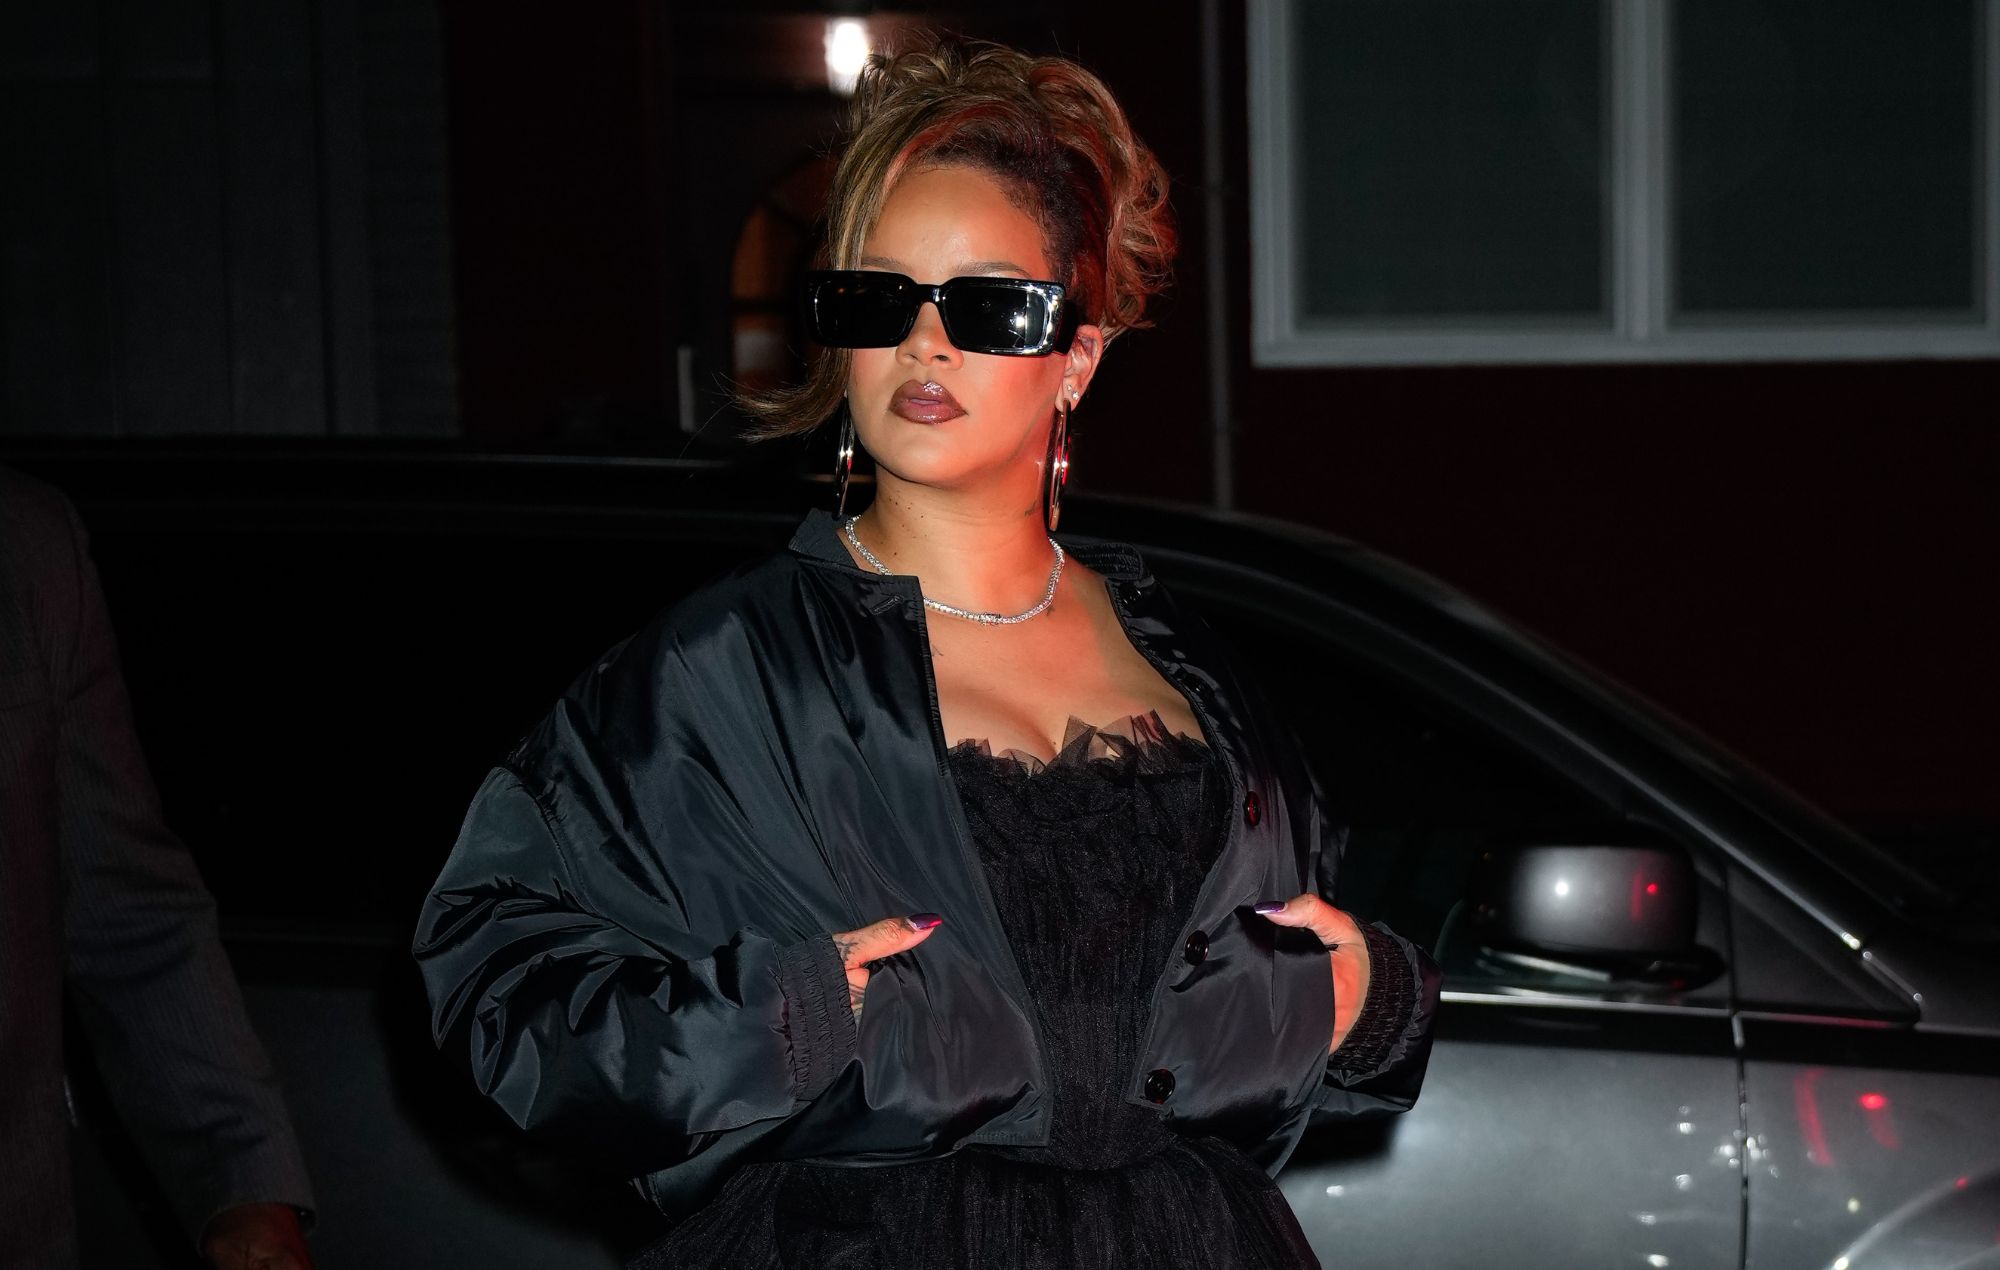 Rihanna says she has “a lot of visual ideas” for new album and “the songs she needs to make”